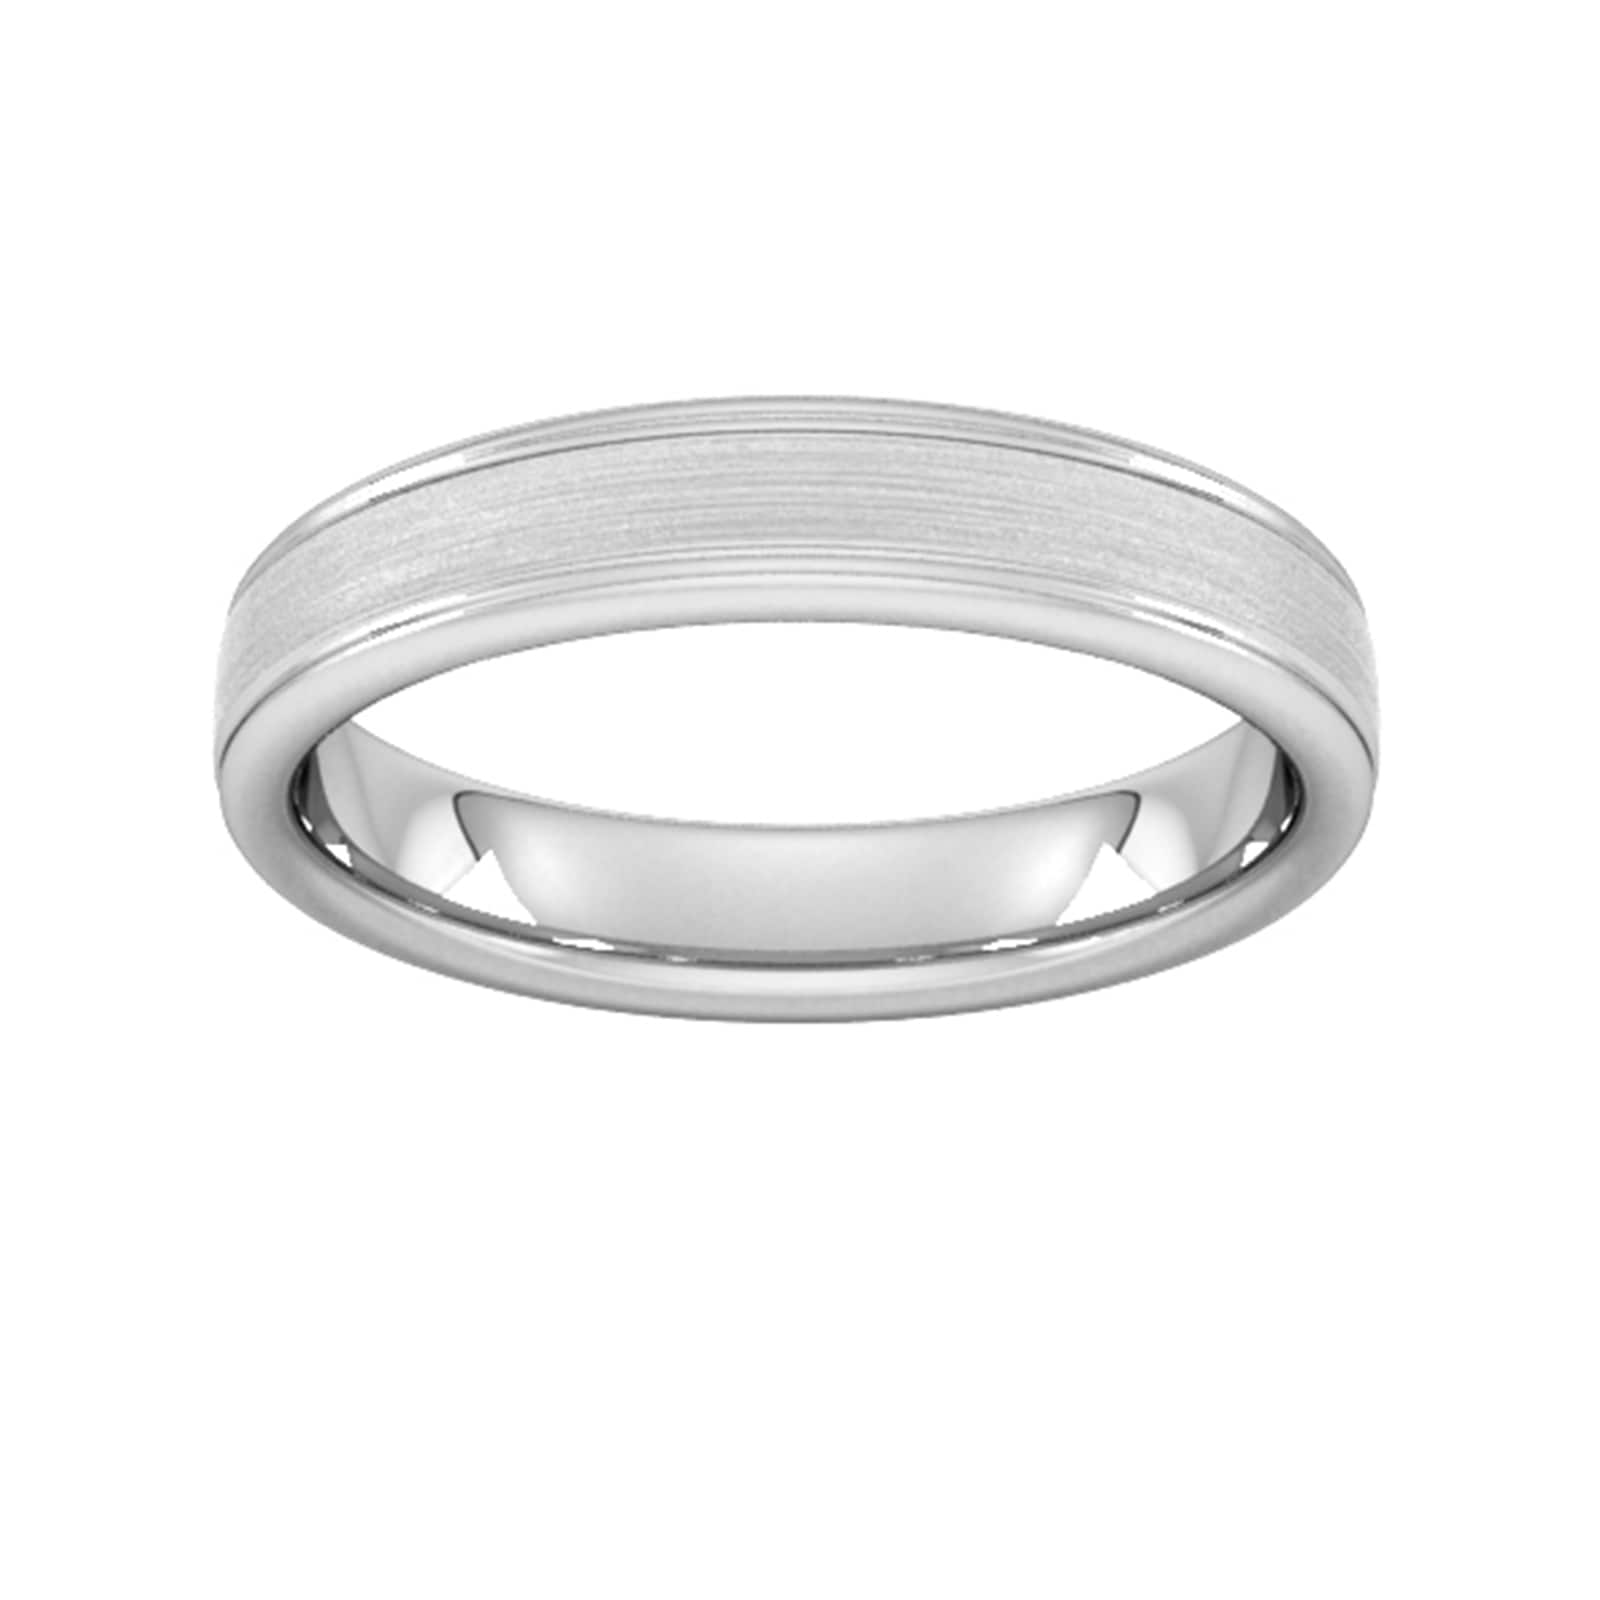 4mm Slight Court Heavy Matt Centre With Grooves Wedding Ring In 18 Carat White Gold - Ring Size X